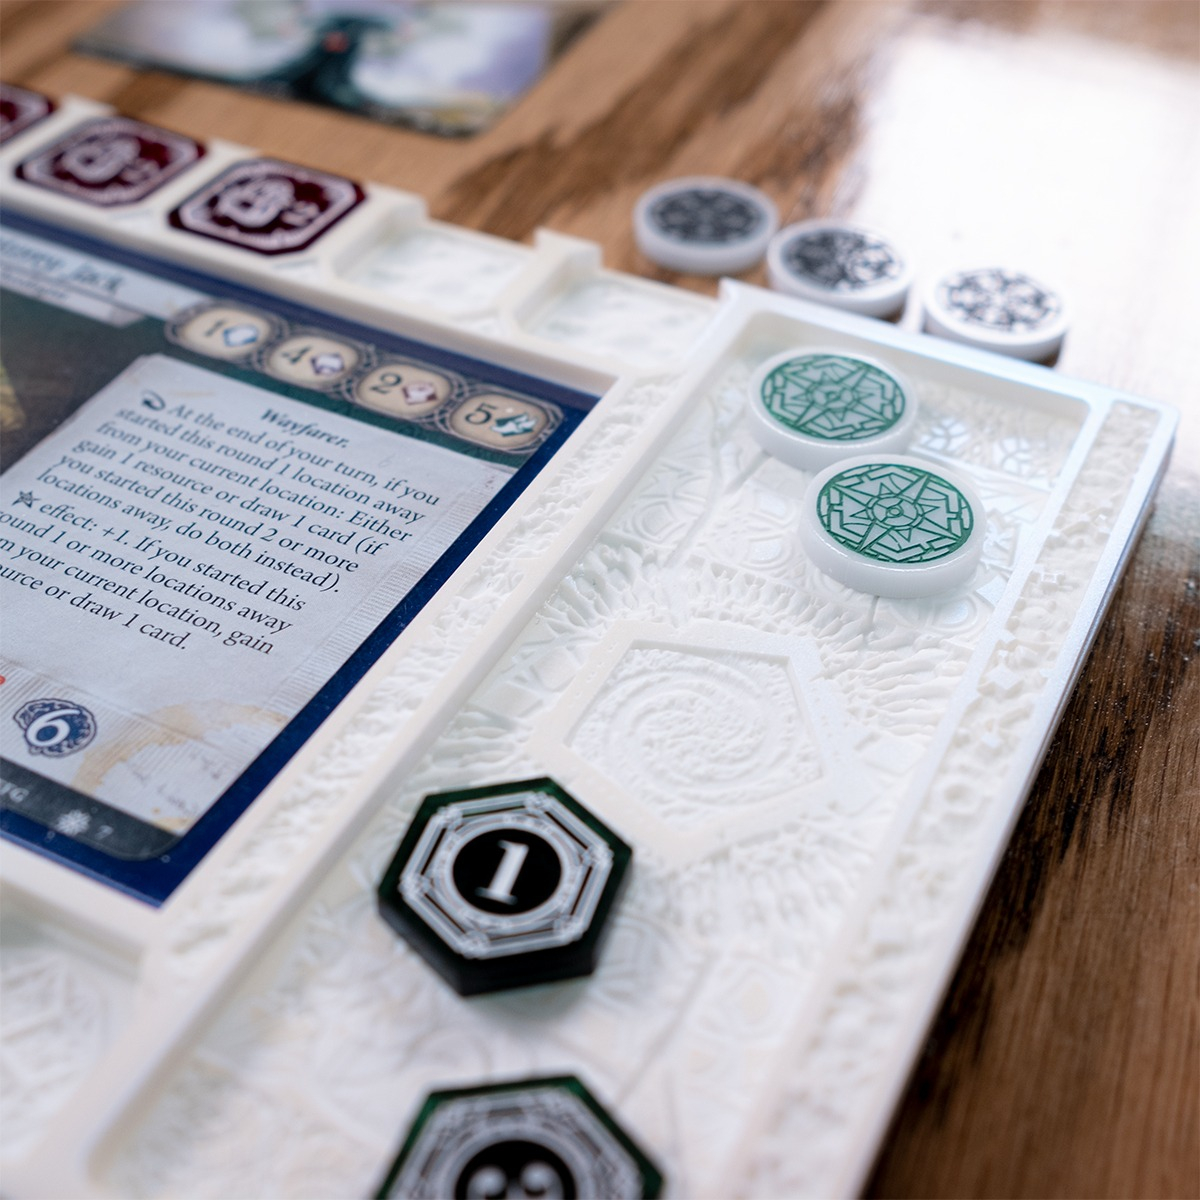 Close up of the Clue/Resource holder section of the Edge of Earth Mythos Board with minimal lighting, displaying the more neutral color of the white board, below two Resource Tokens and two Clue Tokens, designs inspired by Lovecraft’s The Mountains of Madness can be seen